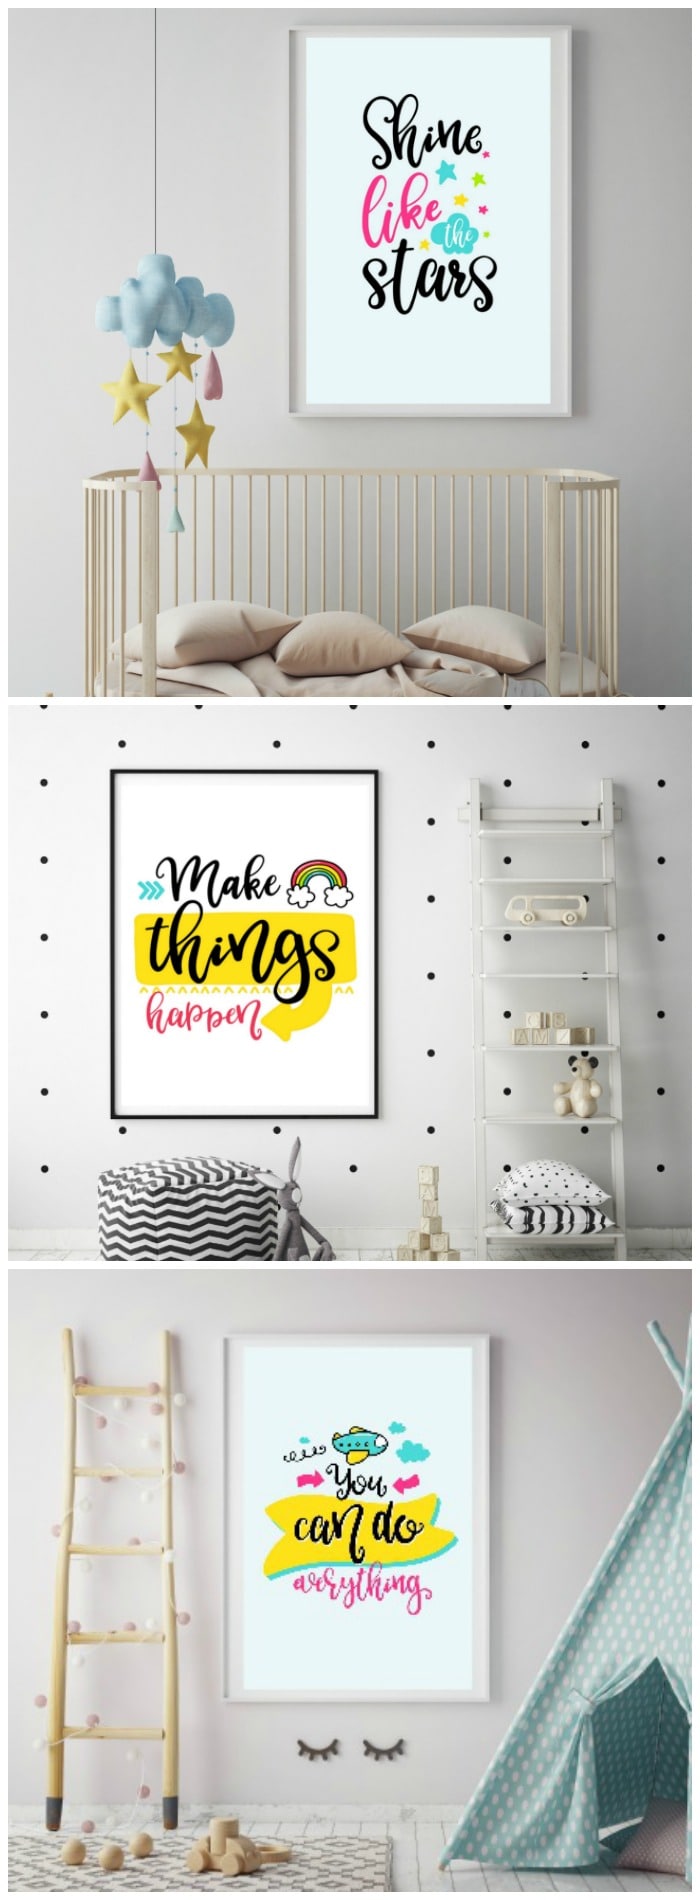 Free printable wall art for a little girl's room will add a splash of fun to any decor. These free printables are adorable and cheerful and your daughter will love them.